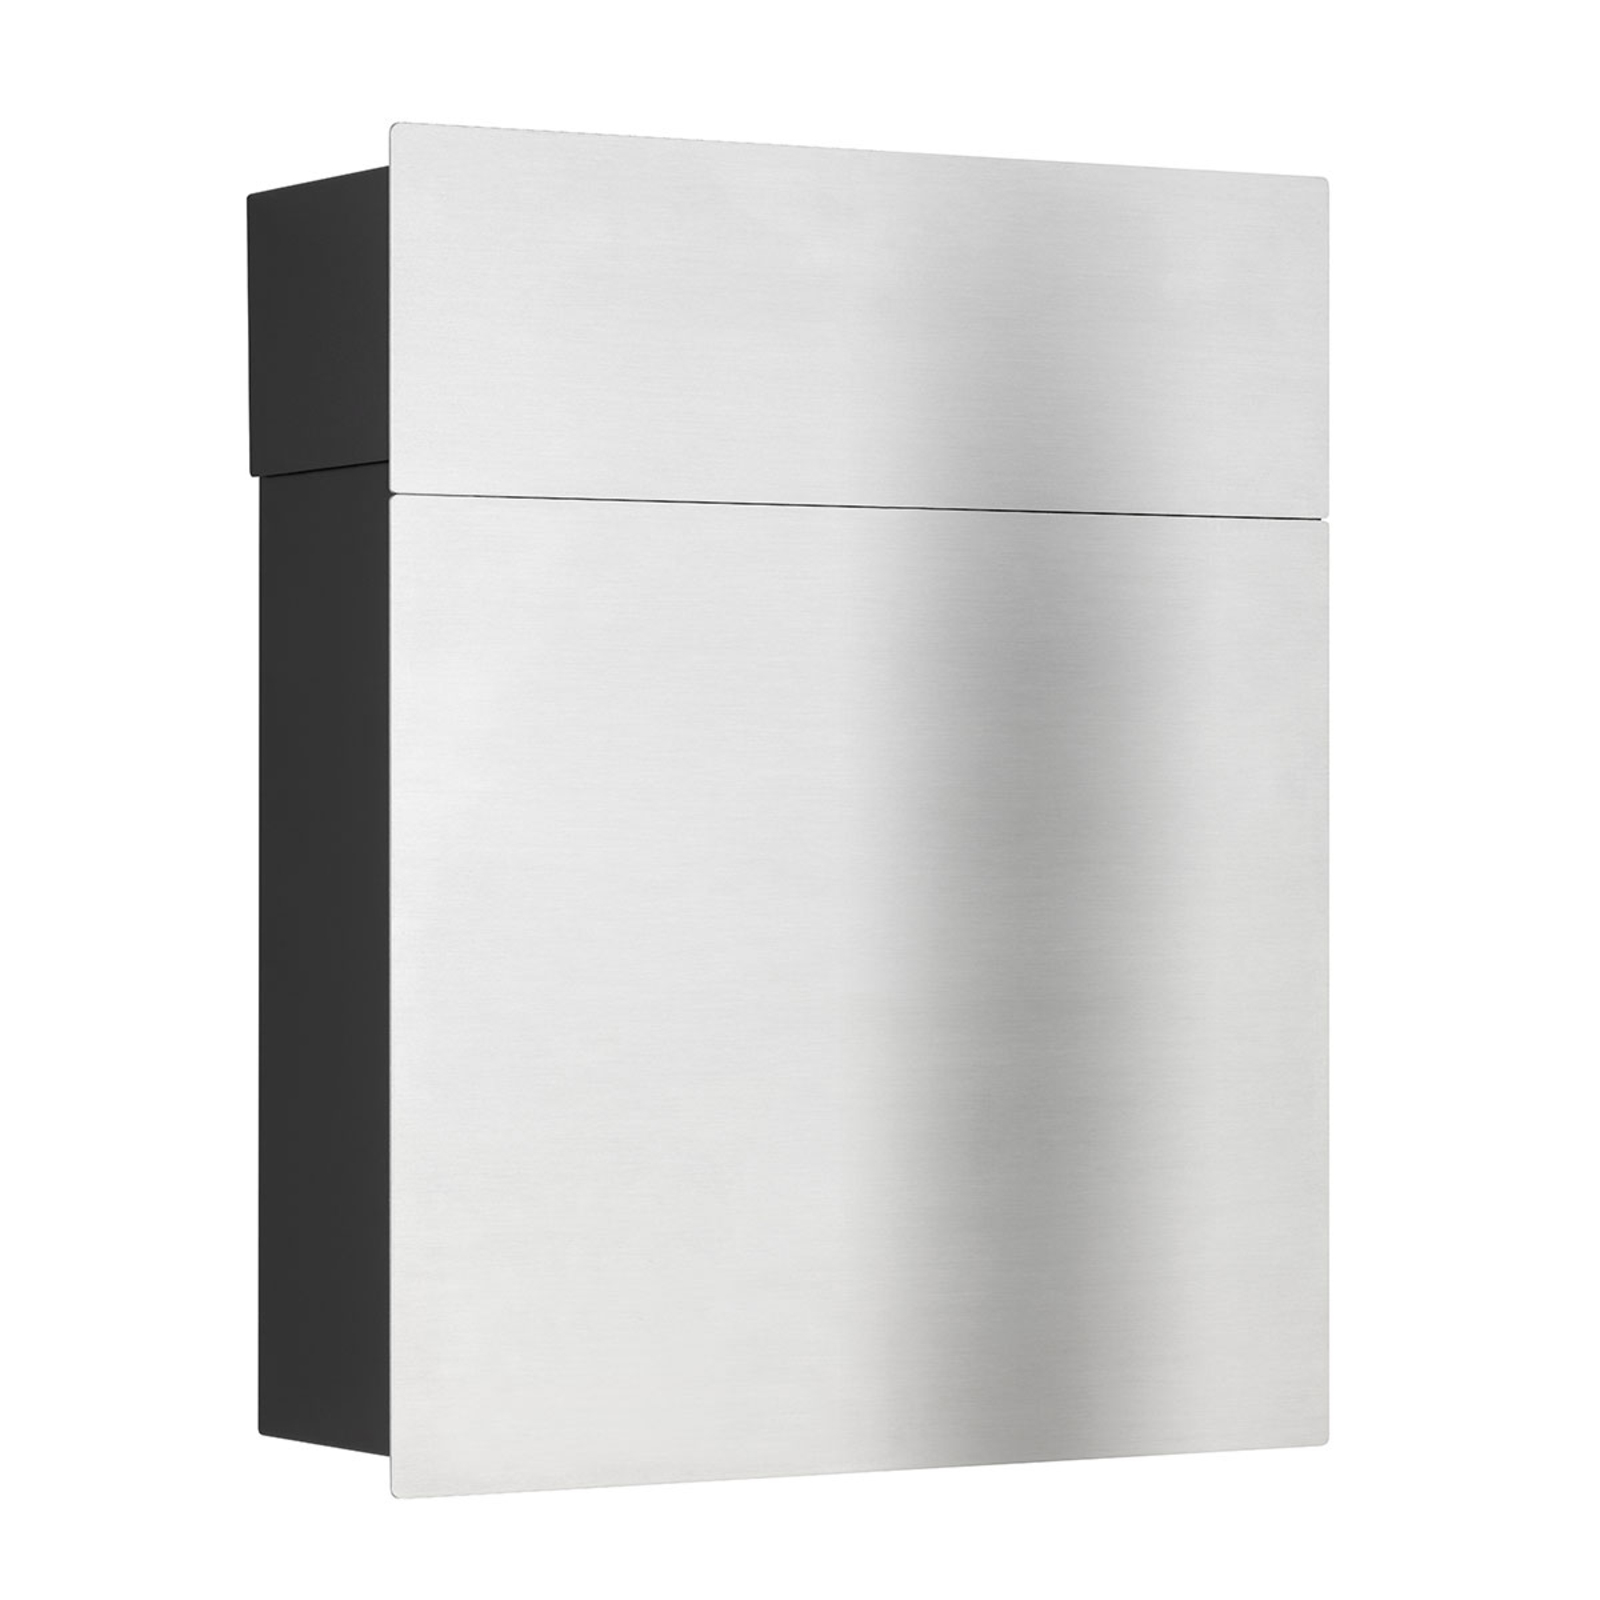 3010 stainless steel letterbox